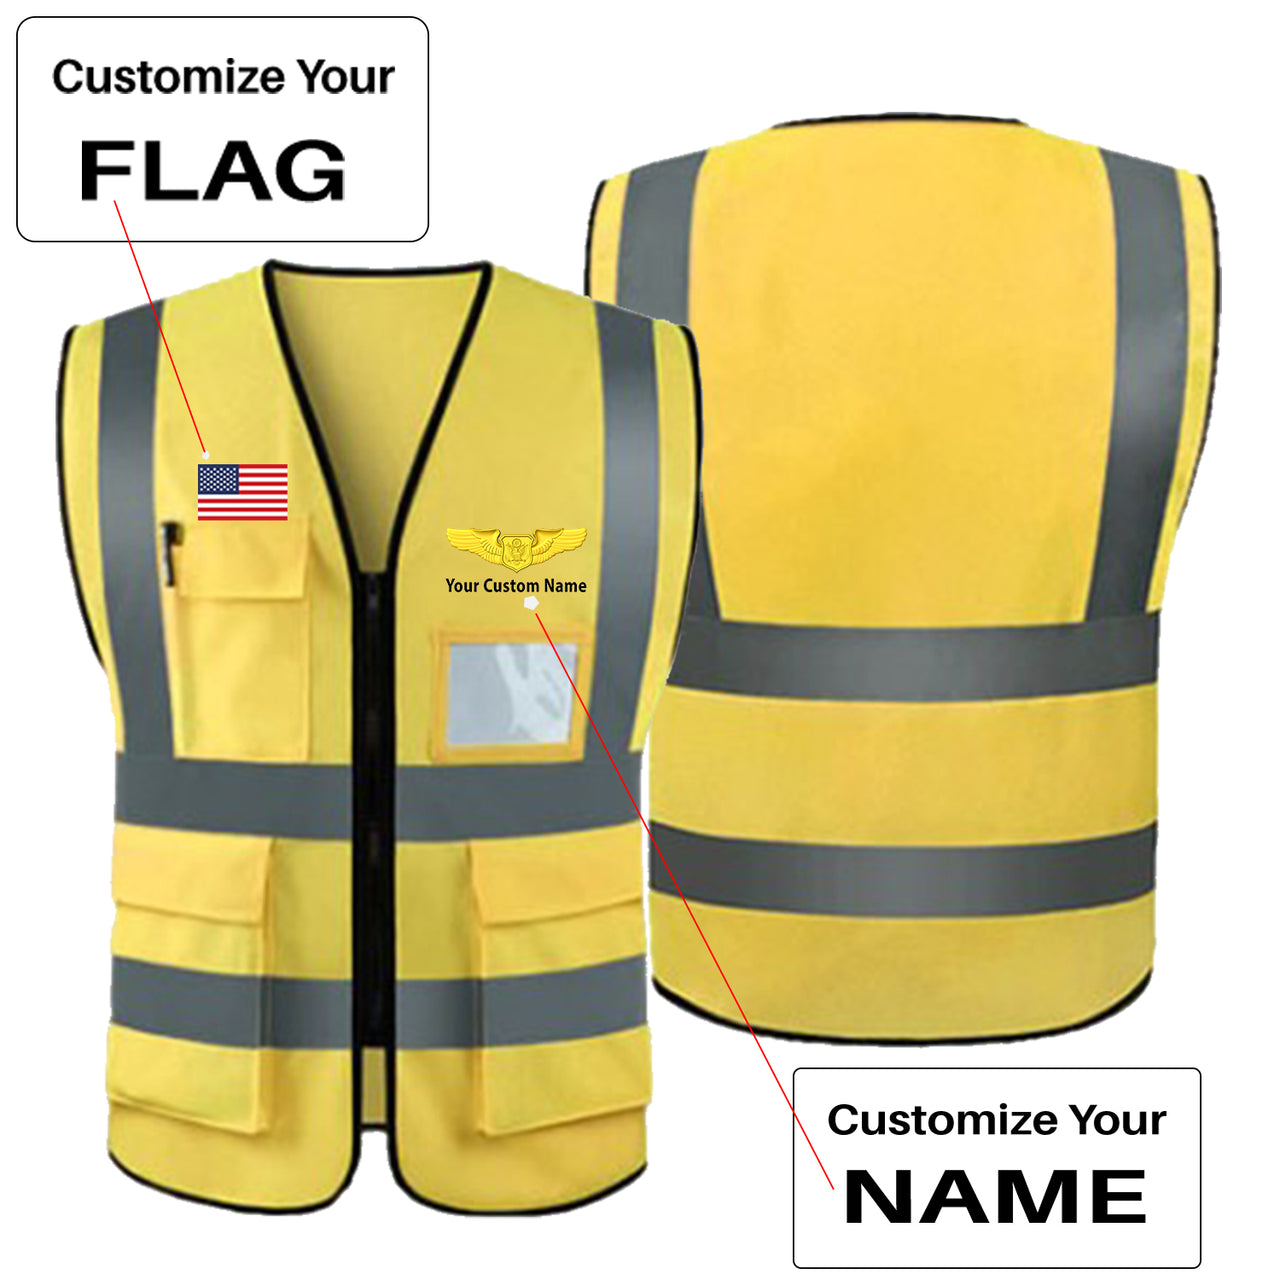 Custom Flag & Name with (Special US Air Force) Designed Reflective Vests